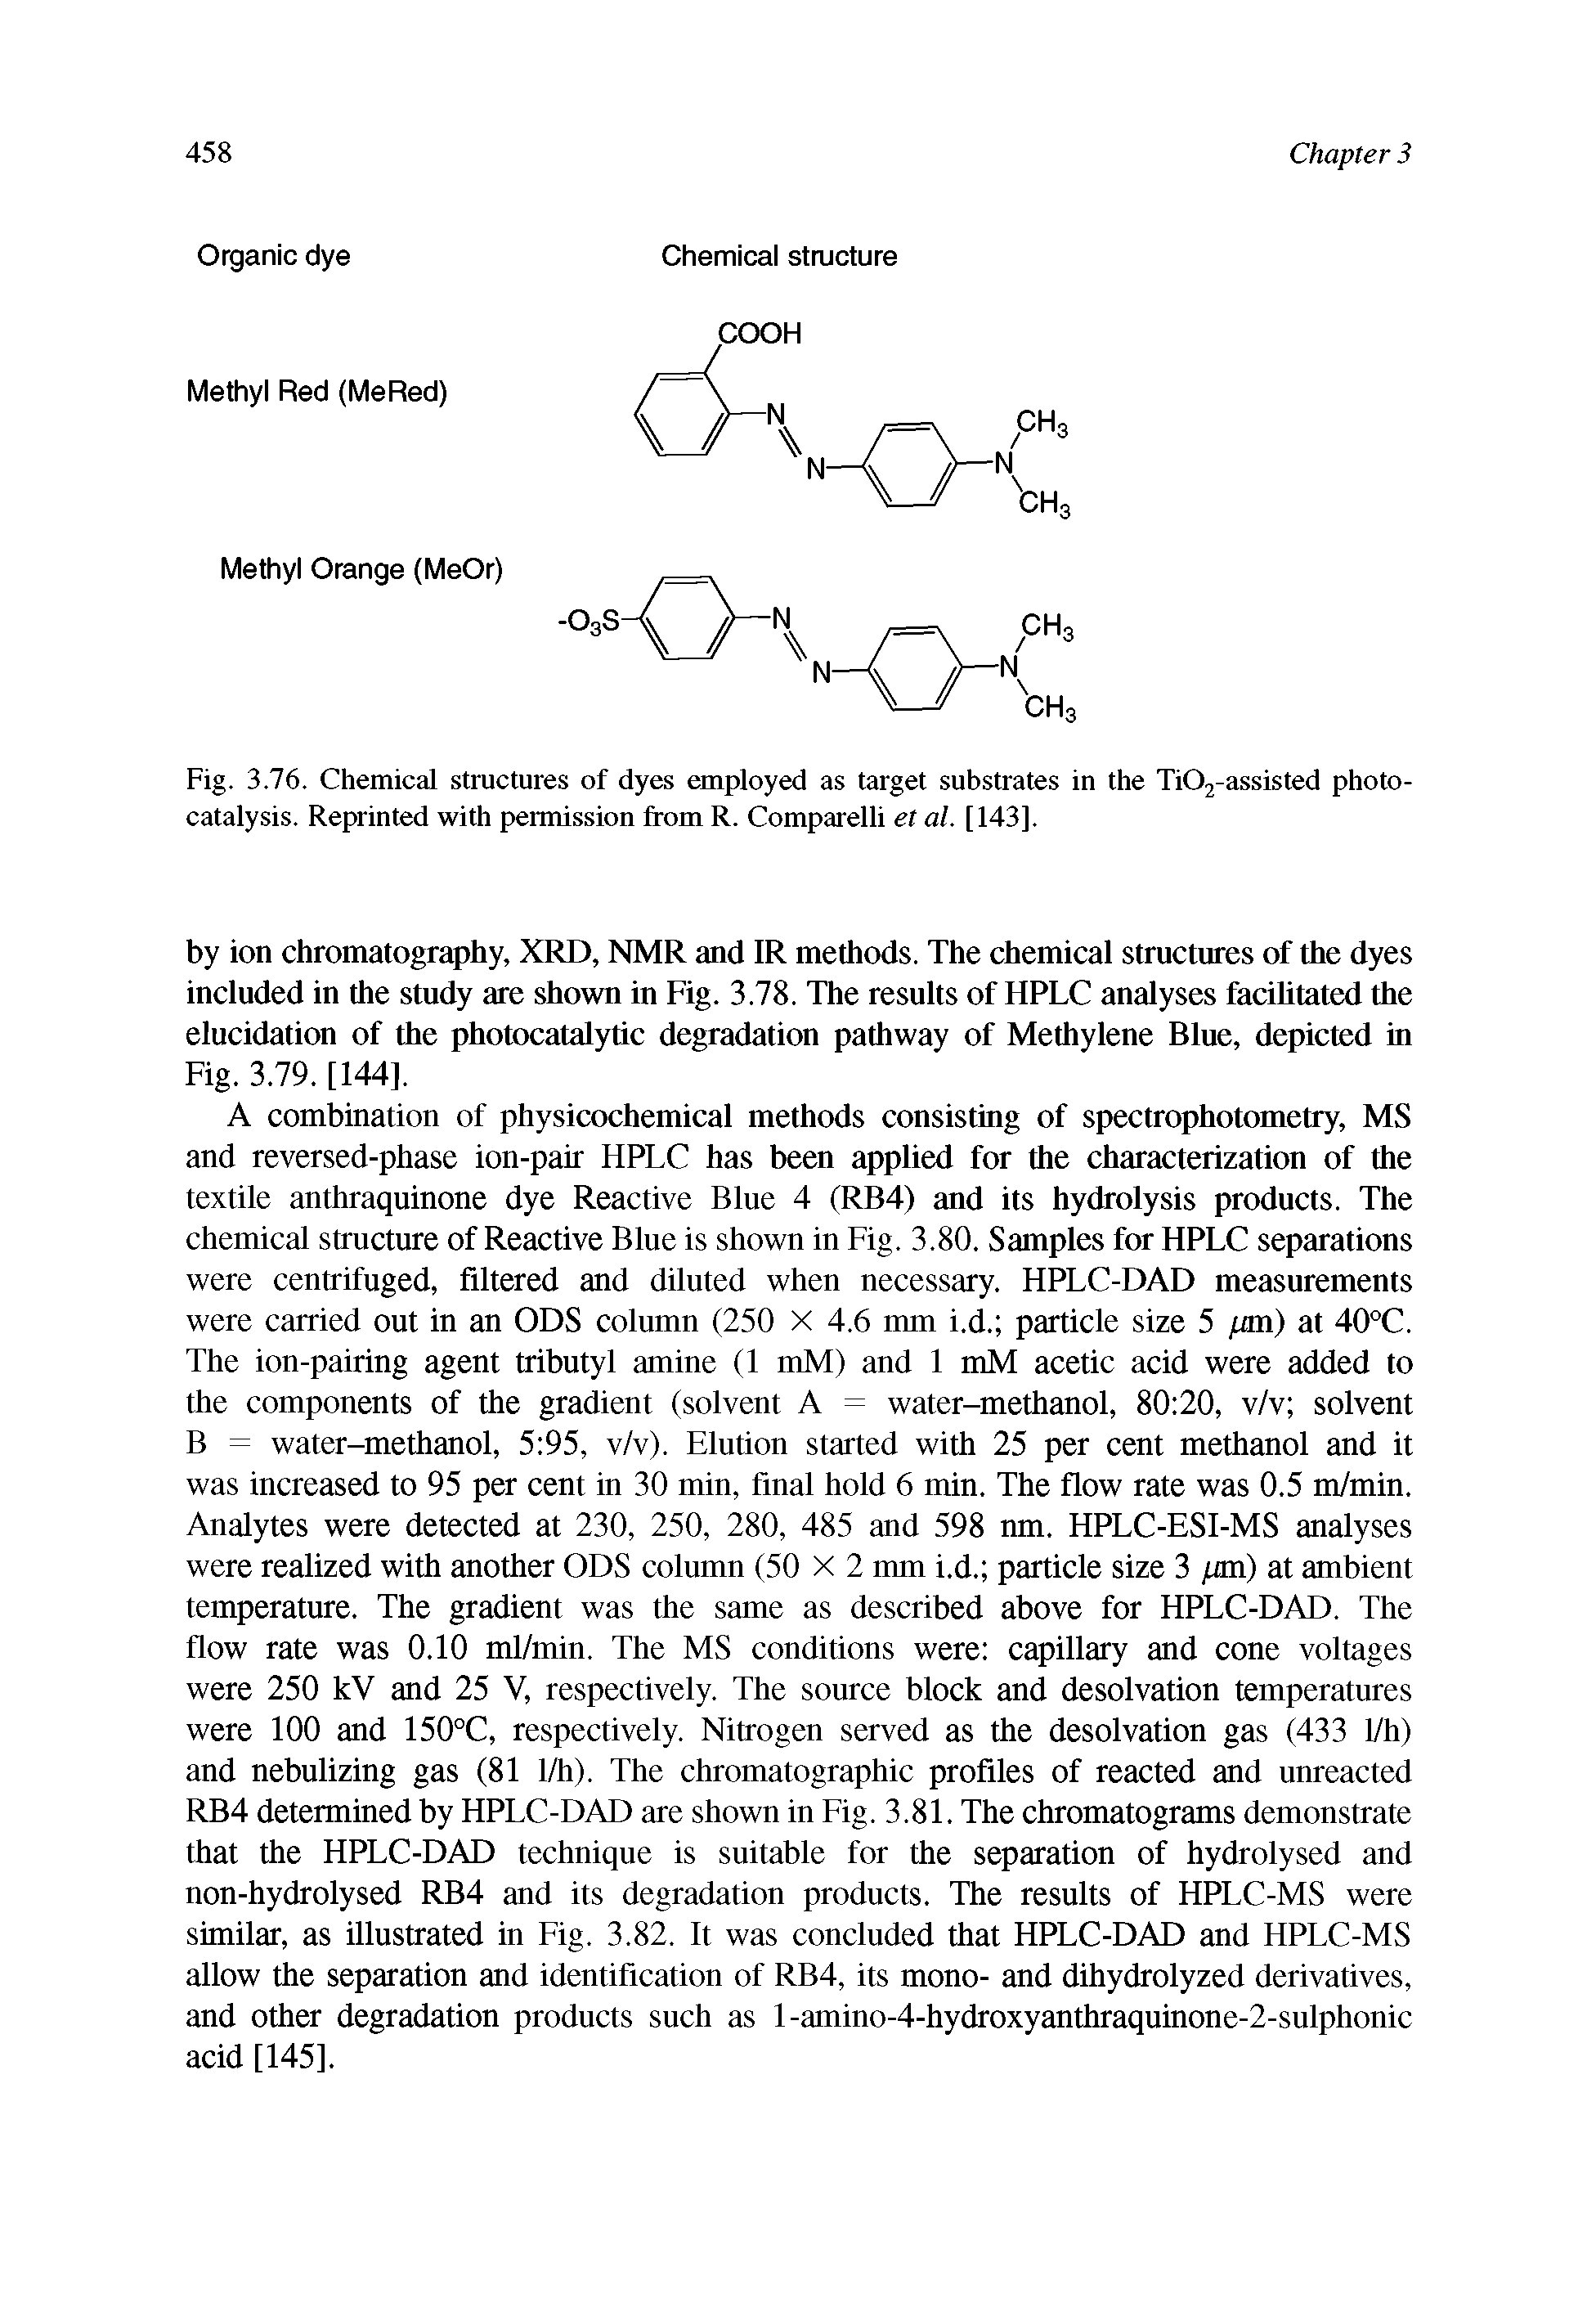 Fig. 3.76. Chemical structures of dyes employed as target substrates in the Ti02-assisted photocatalysis. Reprinted with permission from R. Comparelli et al. [143].